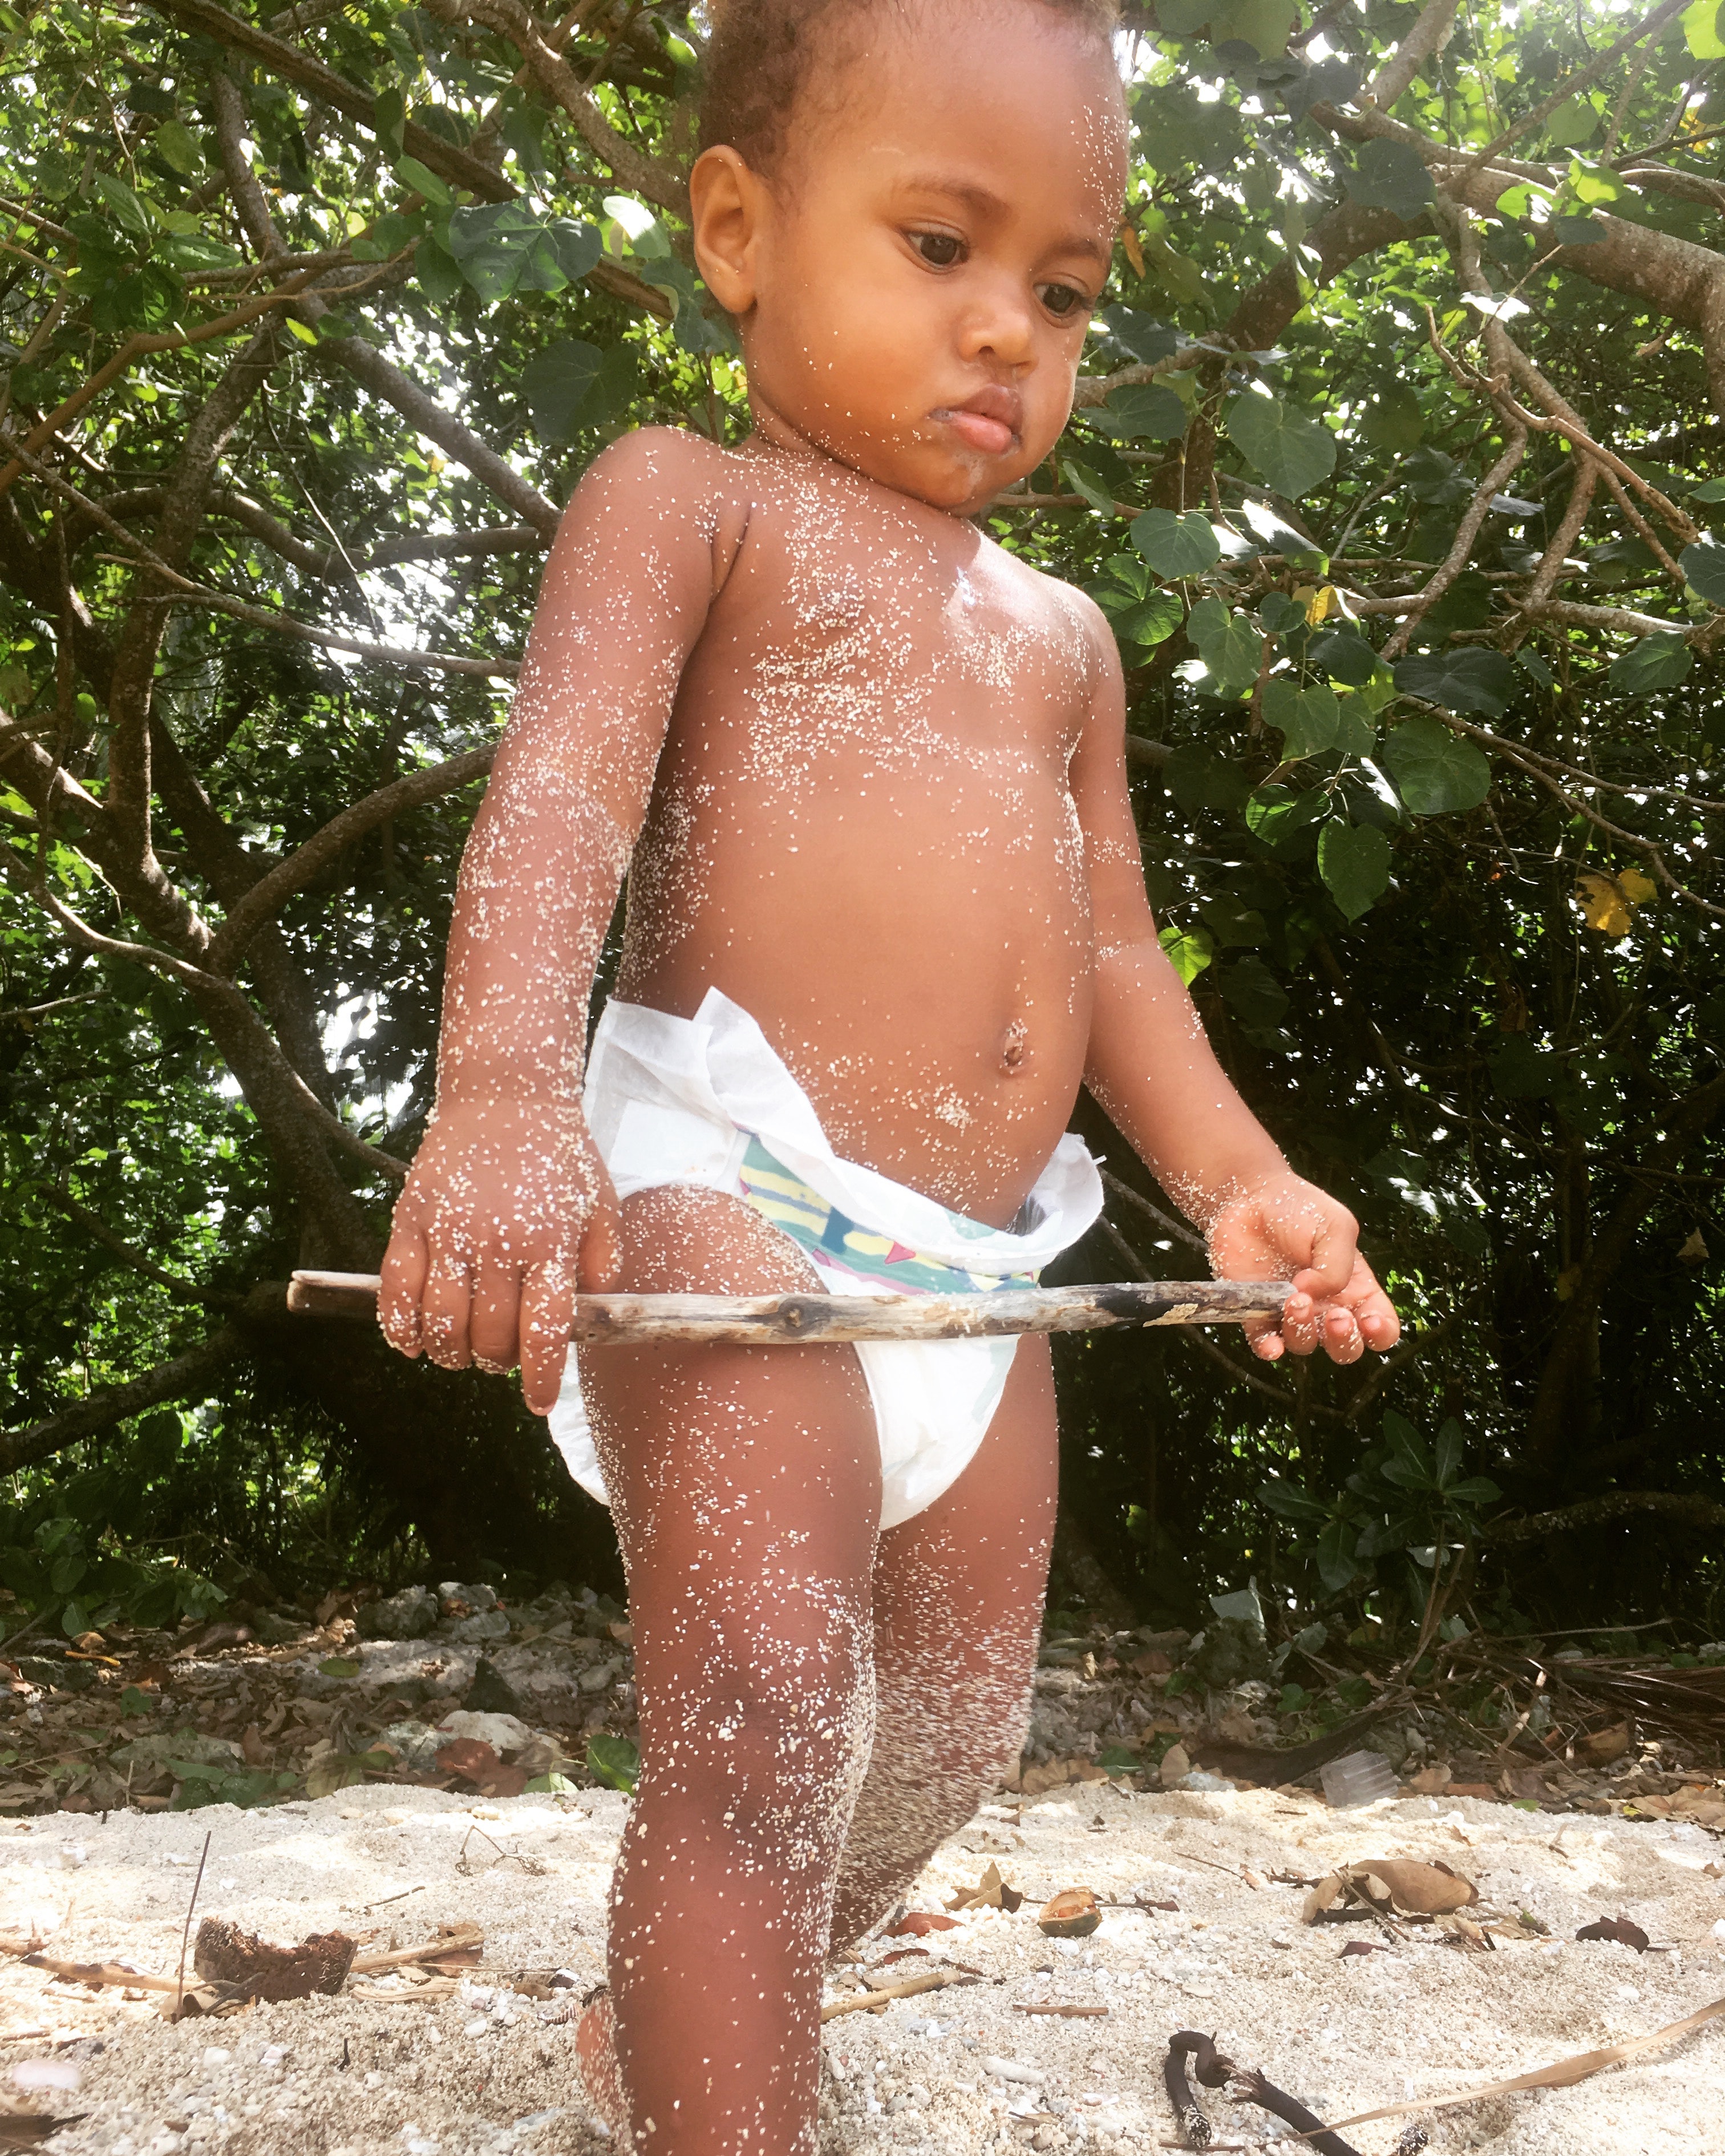 Standing Baby Wearing Diaper, Sand, Young, Wet, Wear, HQ Photo